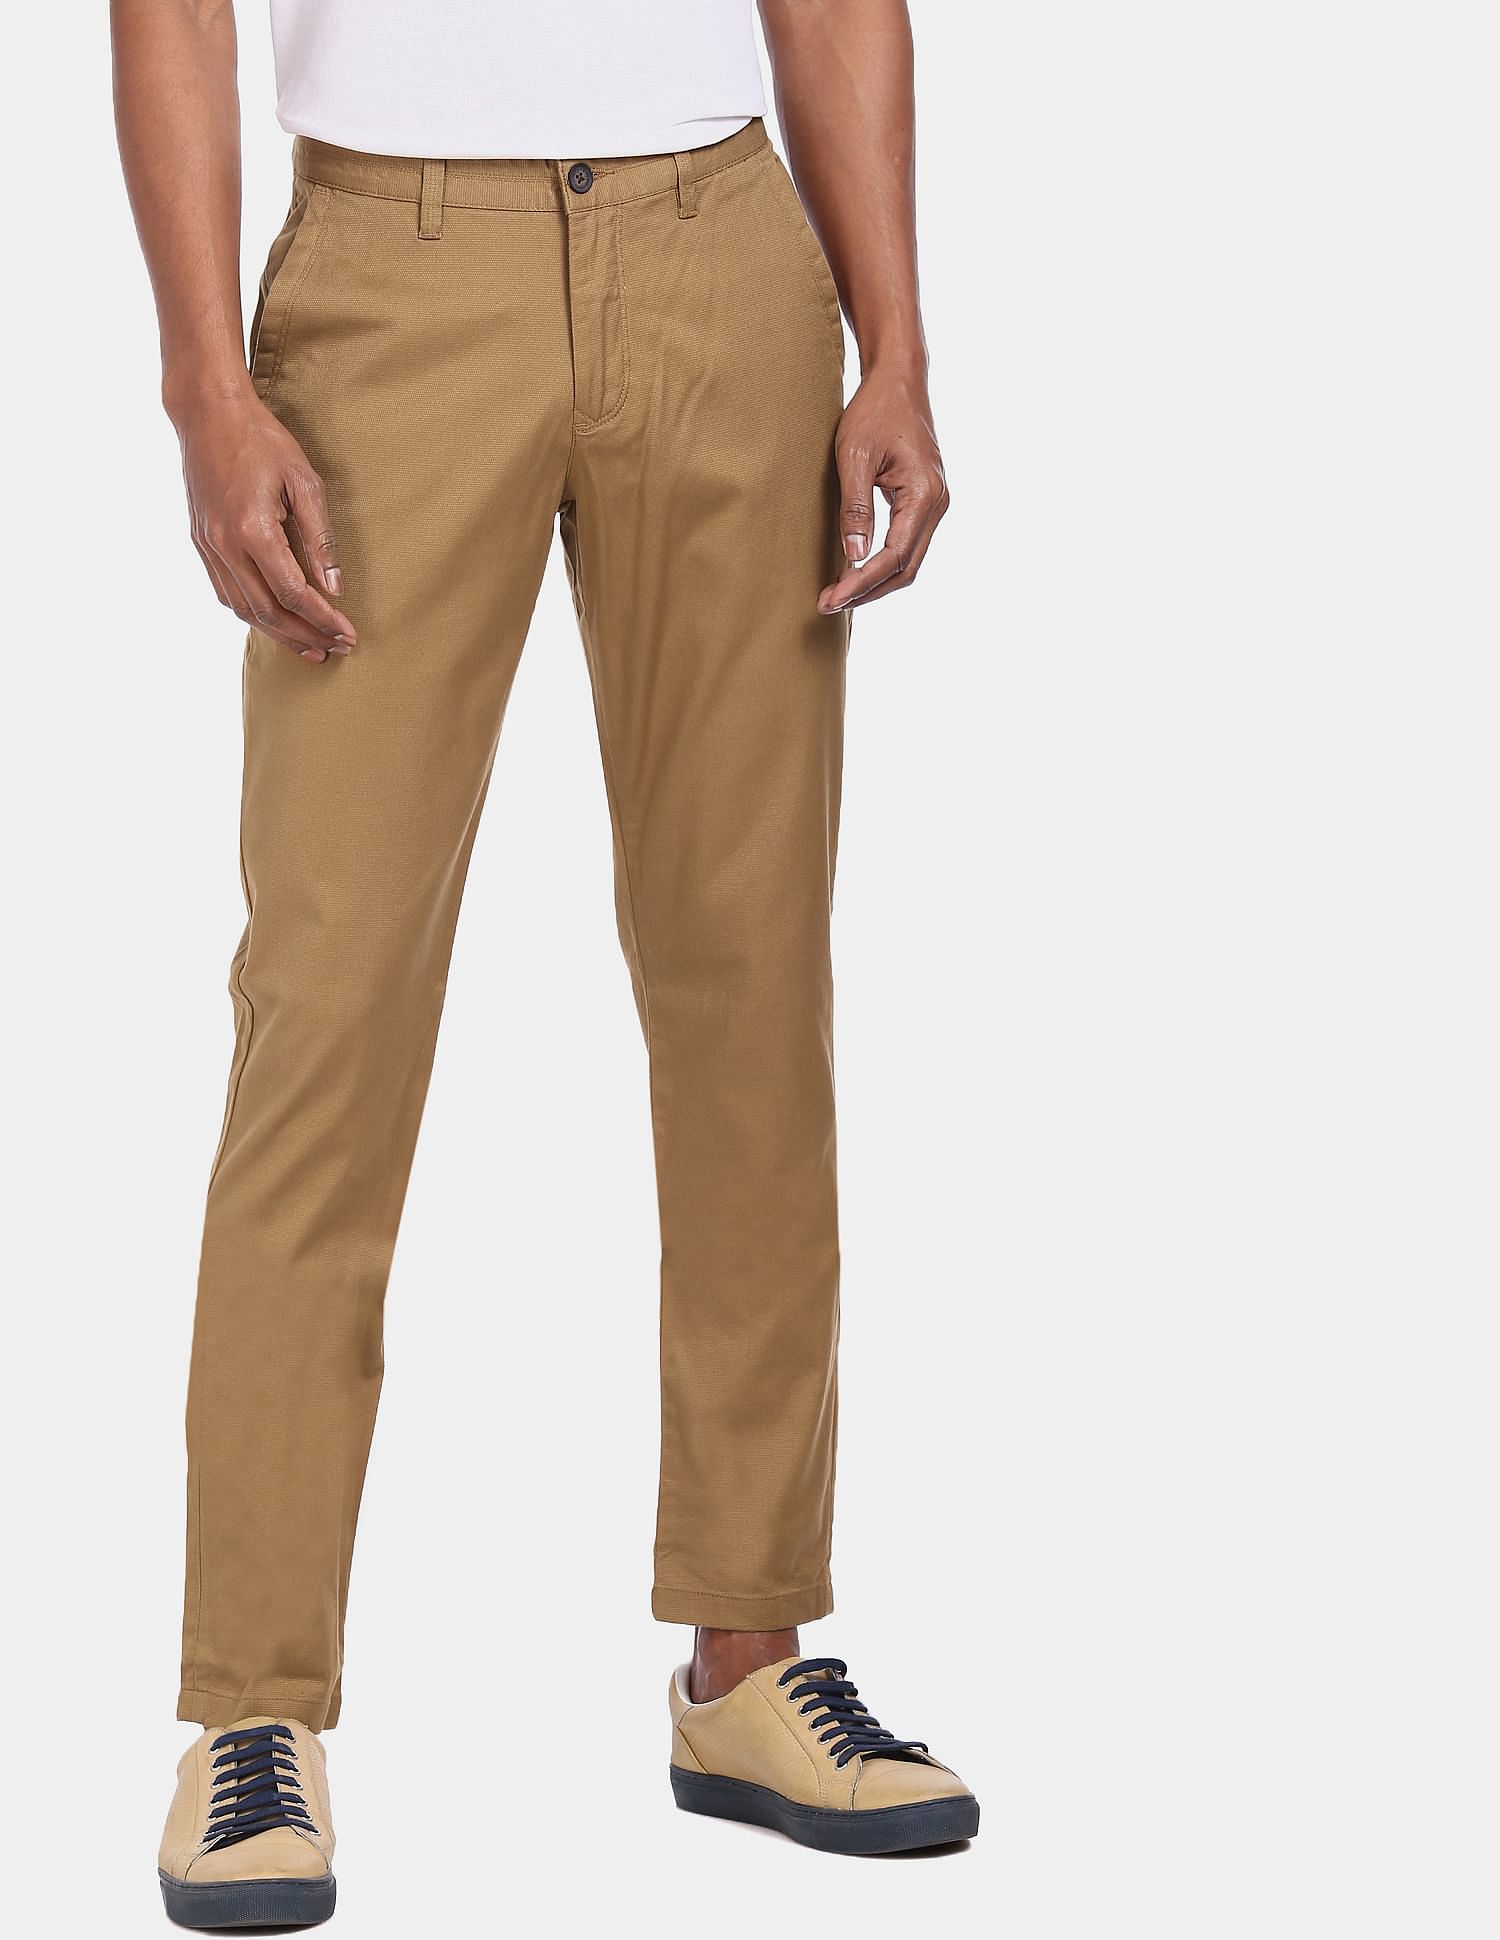 Office trousers in light brown, 16.99€ | Celestino